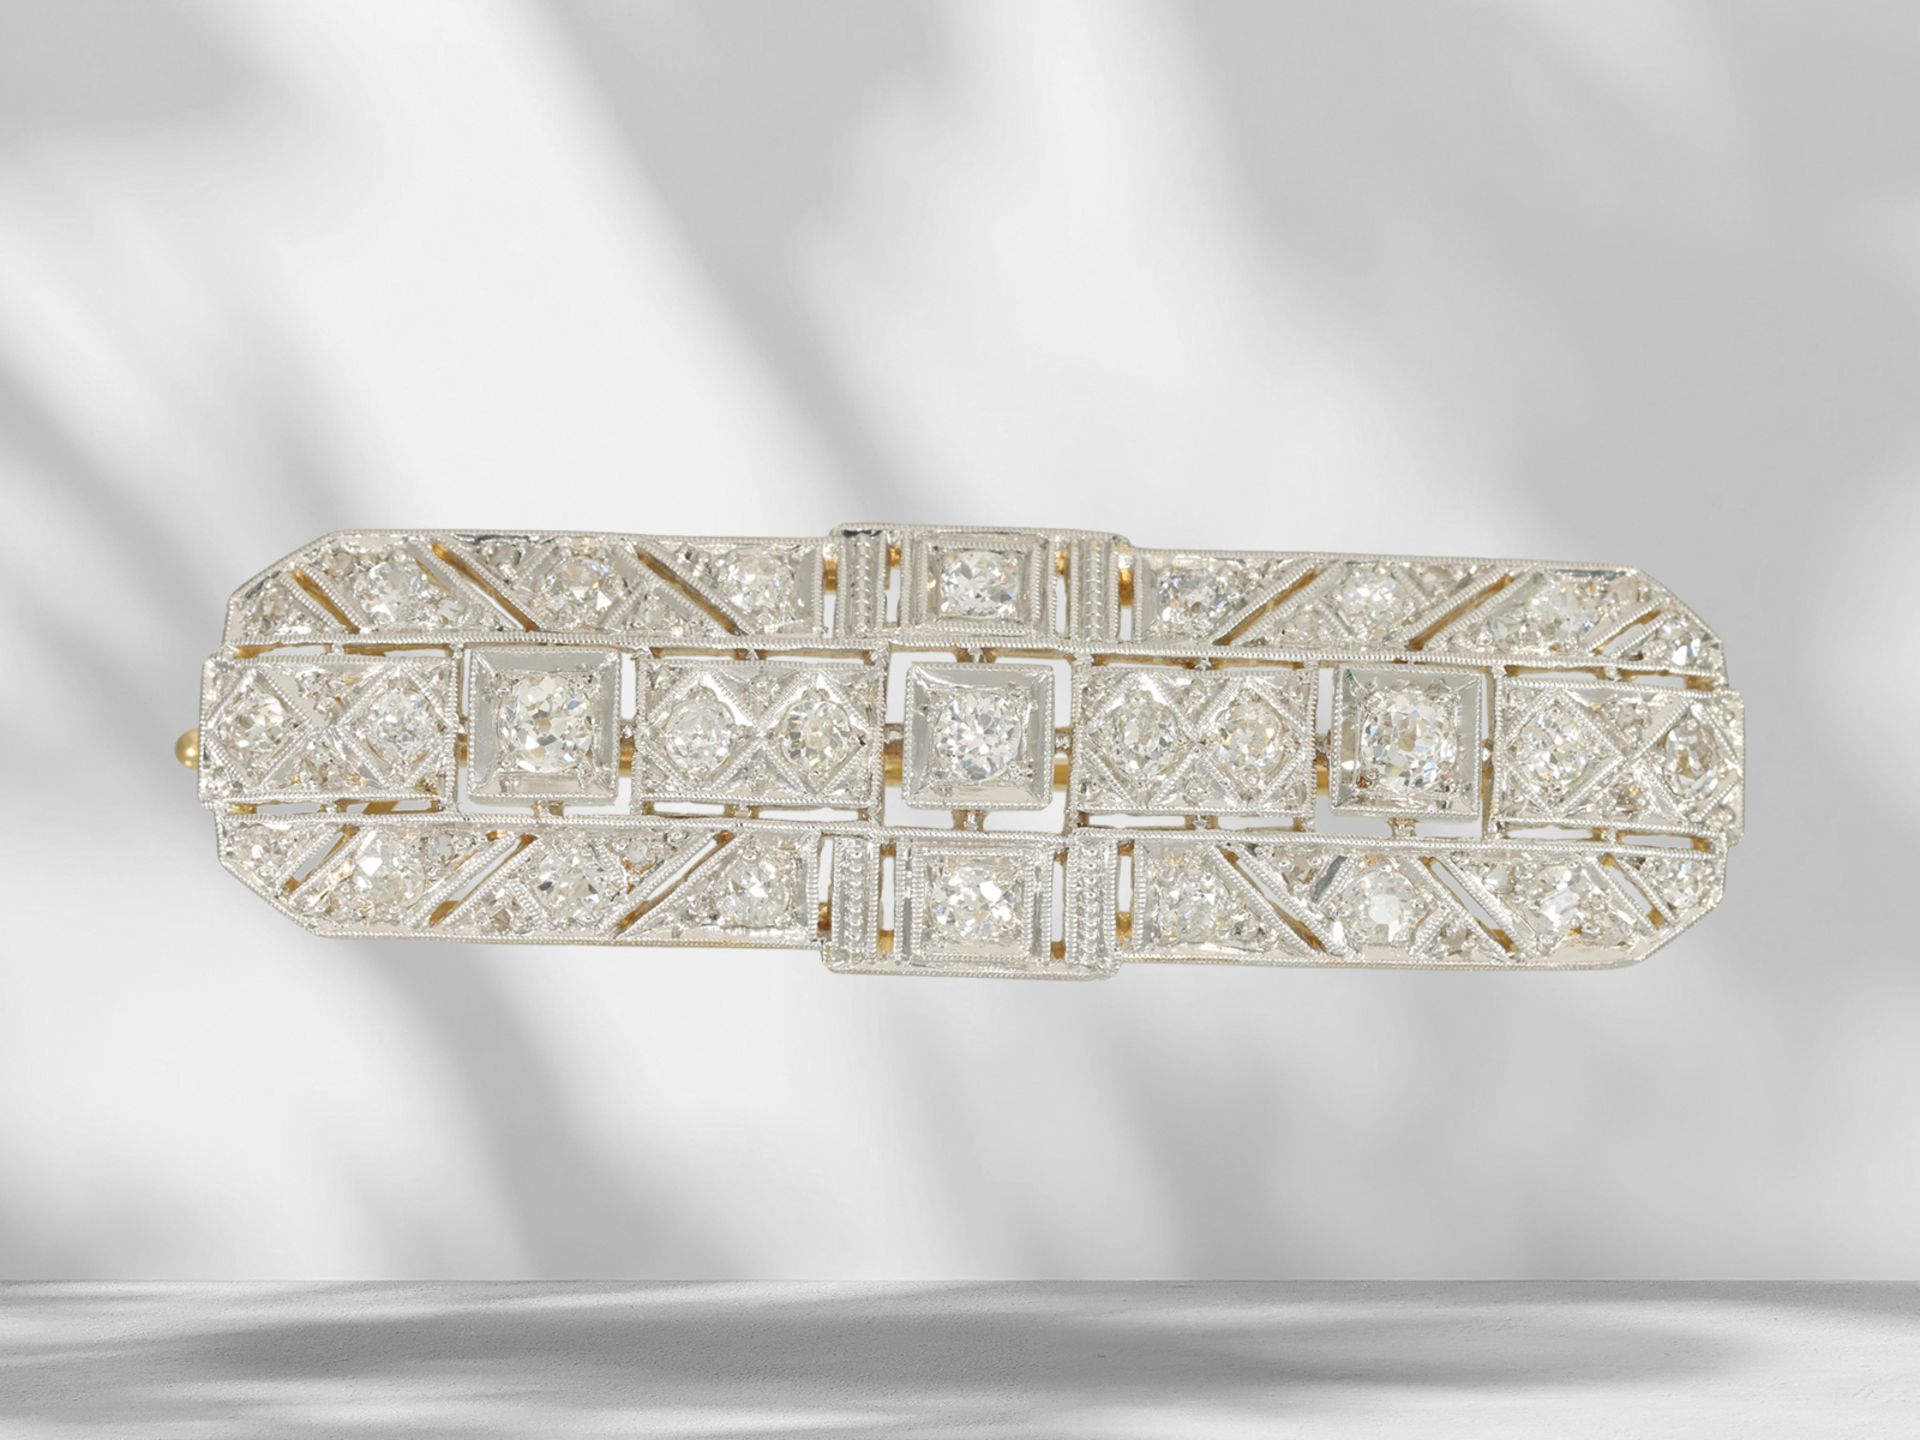 Brooch: antique, elaborate and filigree Art Deco diamond brooch, possibly around 1920 - Image 2 of 5